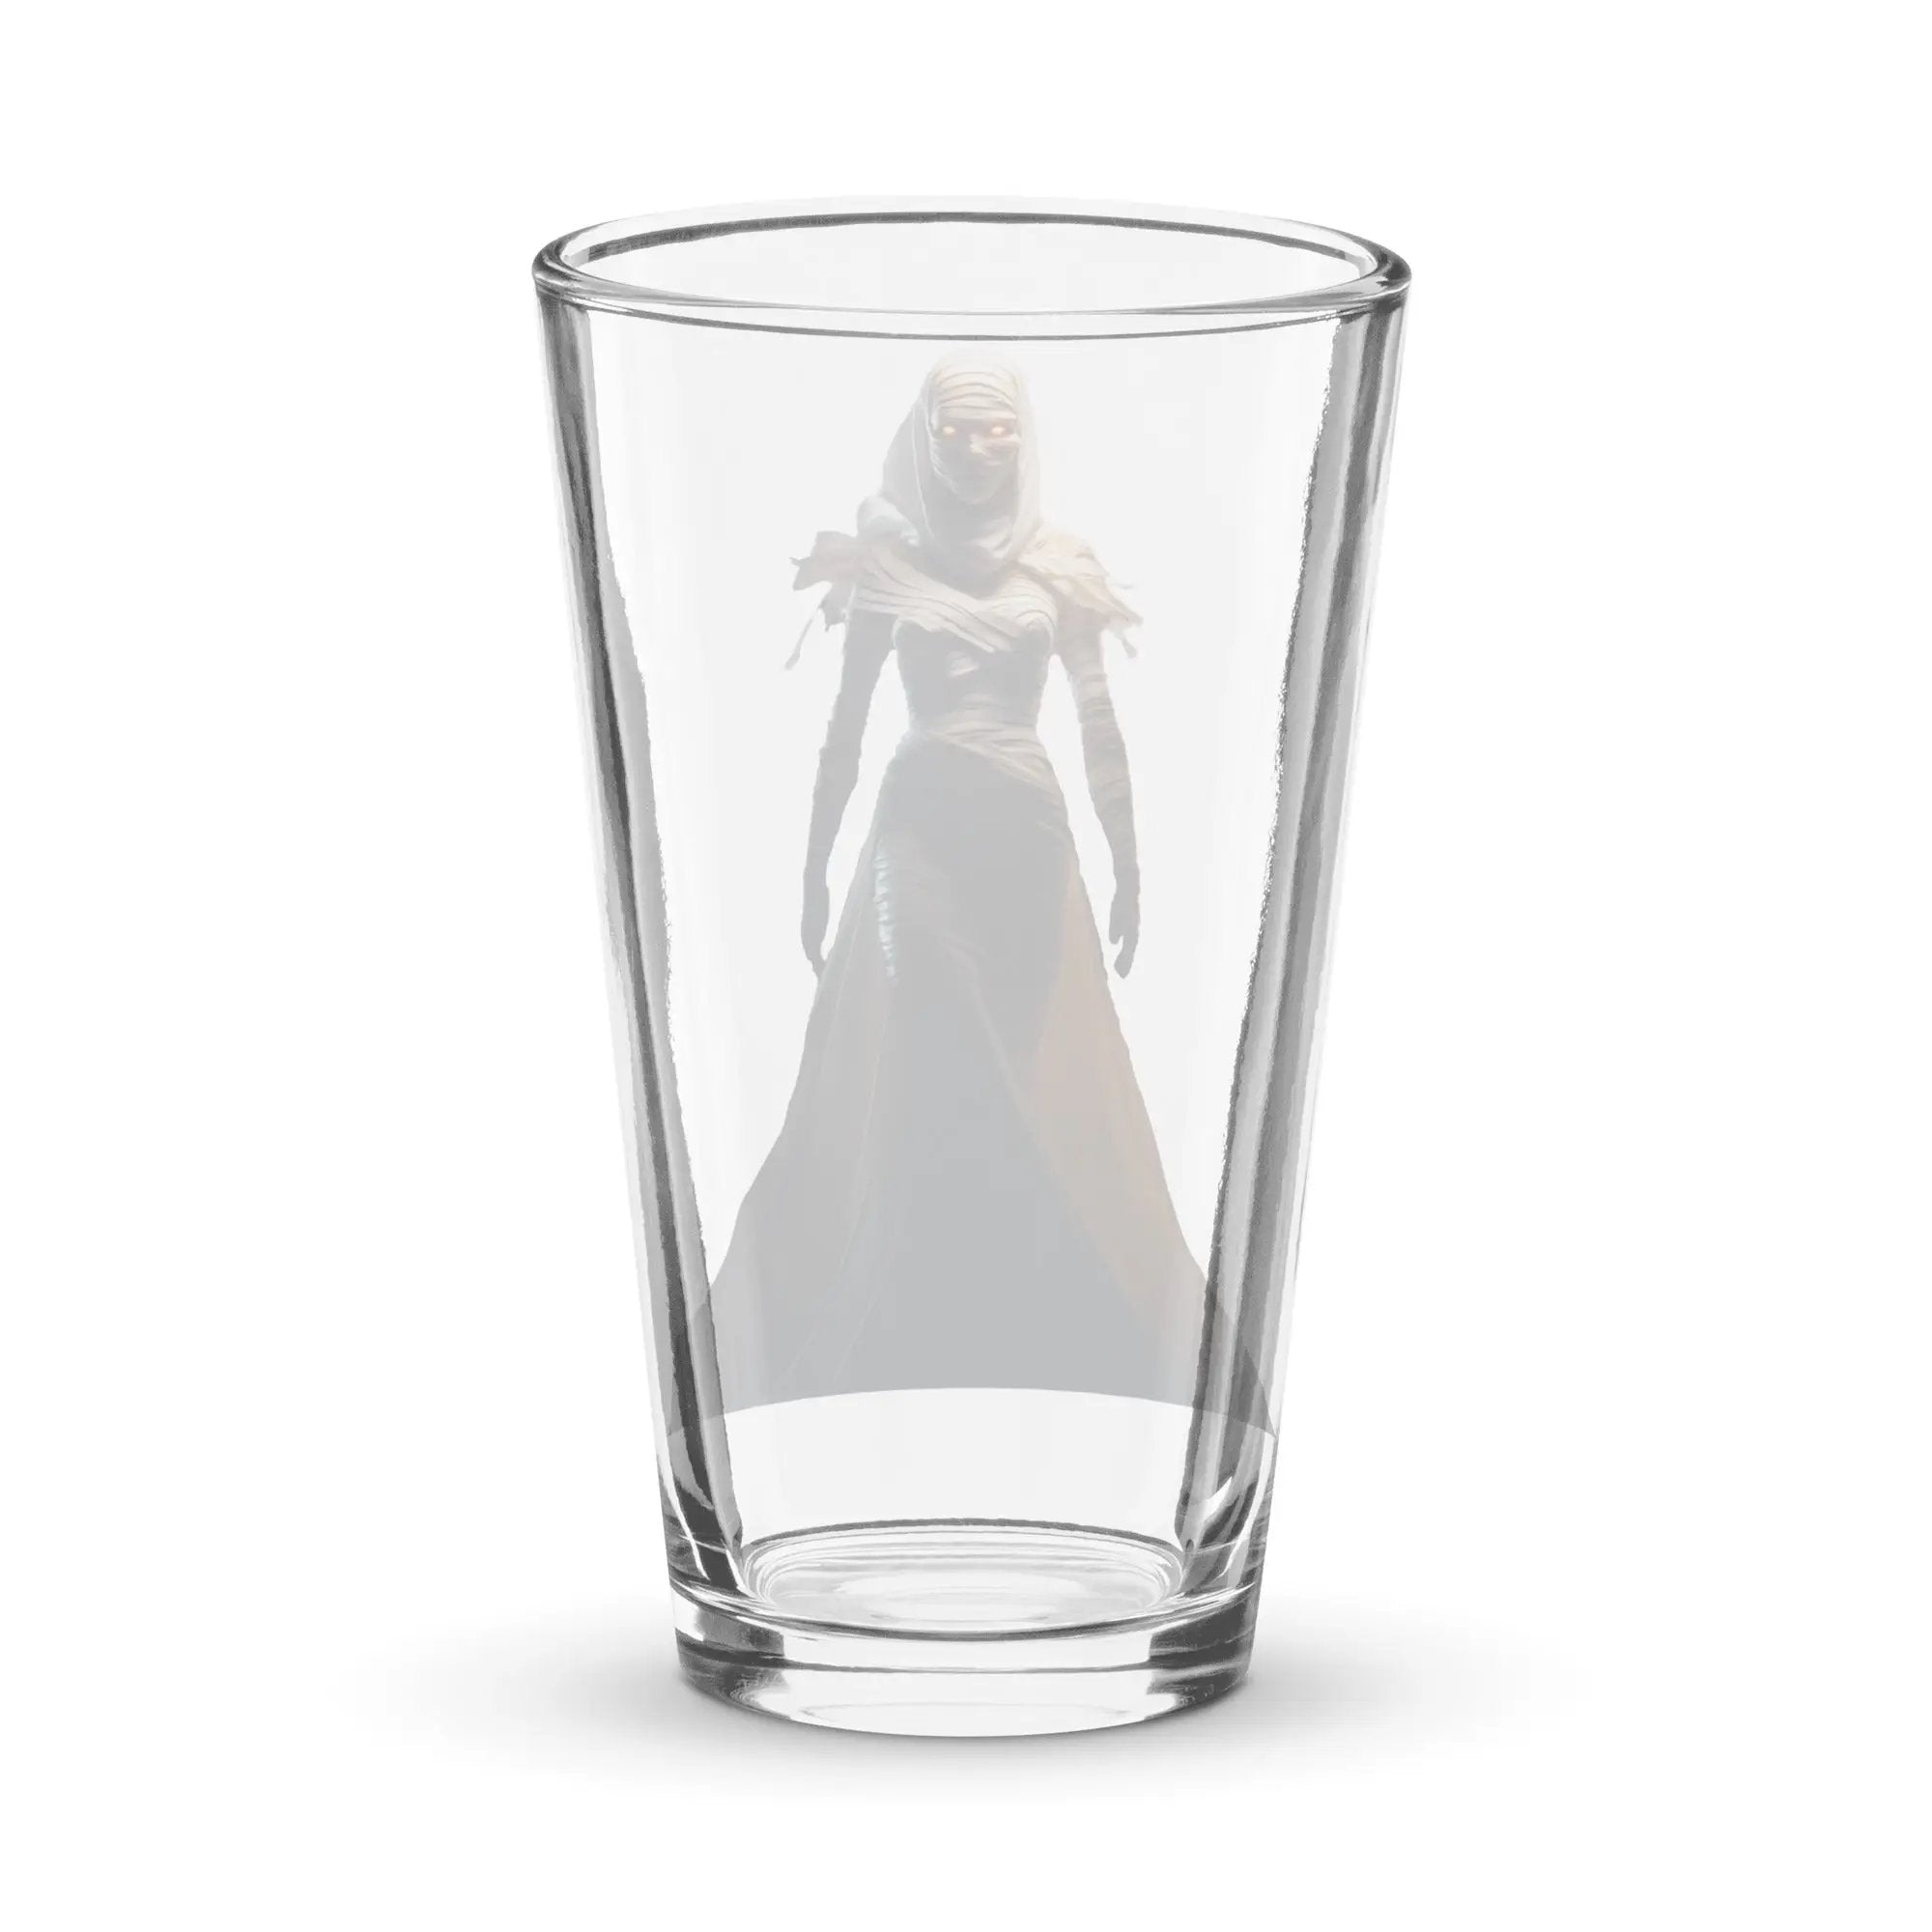 The Monster Squad "The Mummy" Shaker pint glass